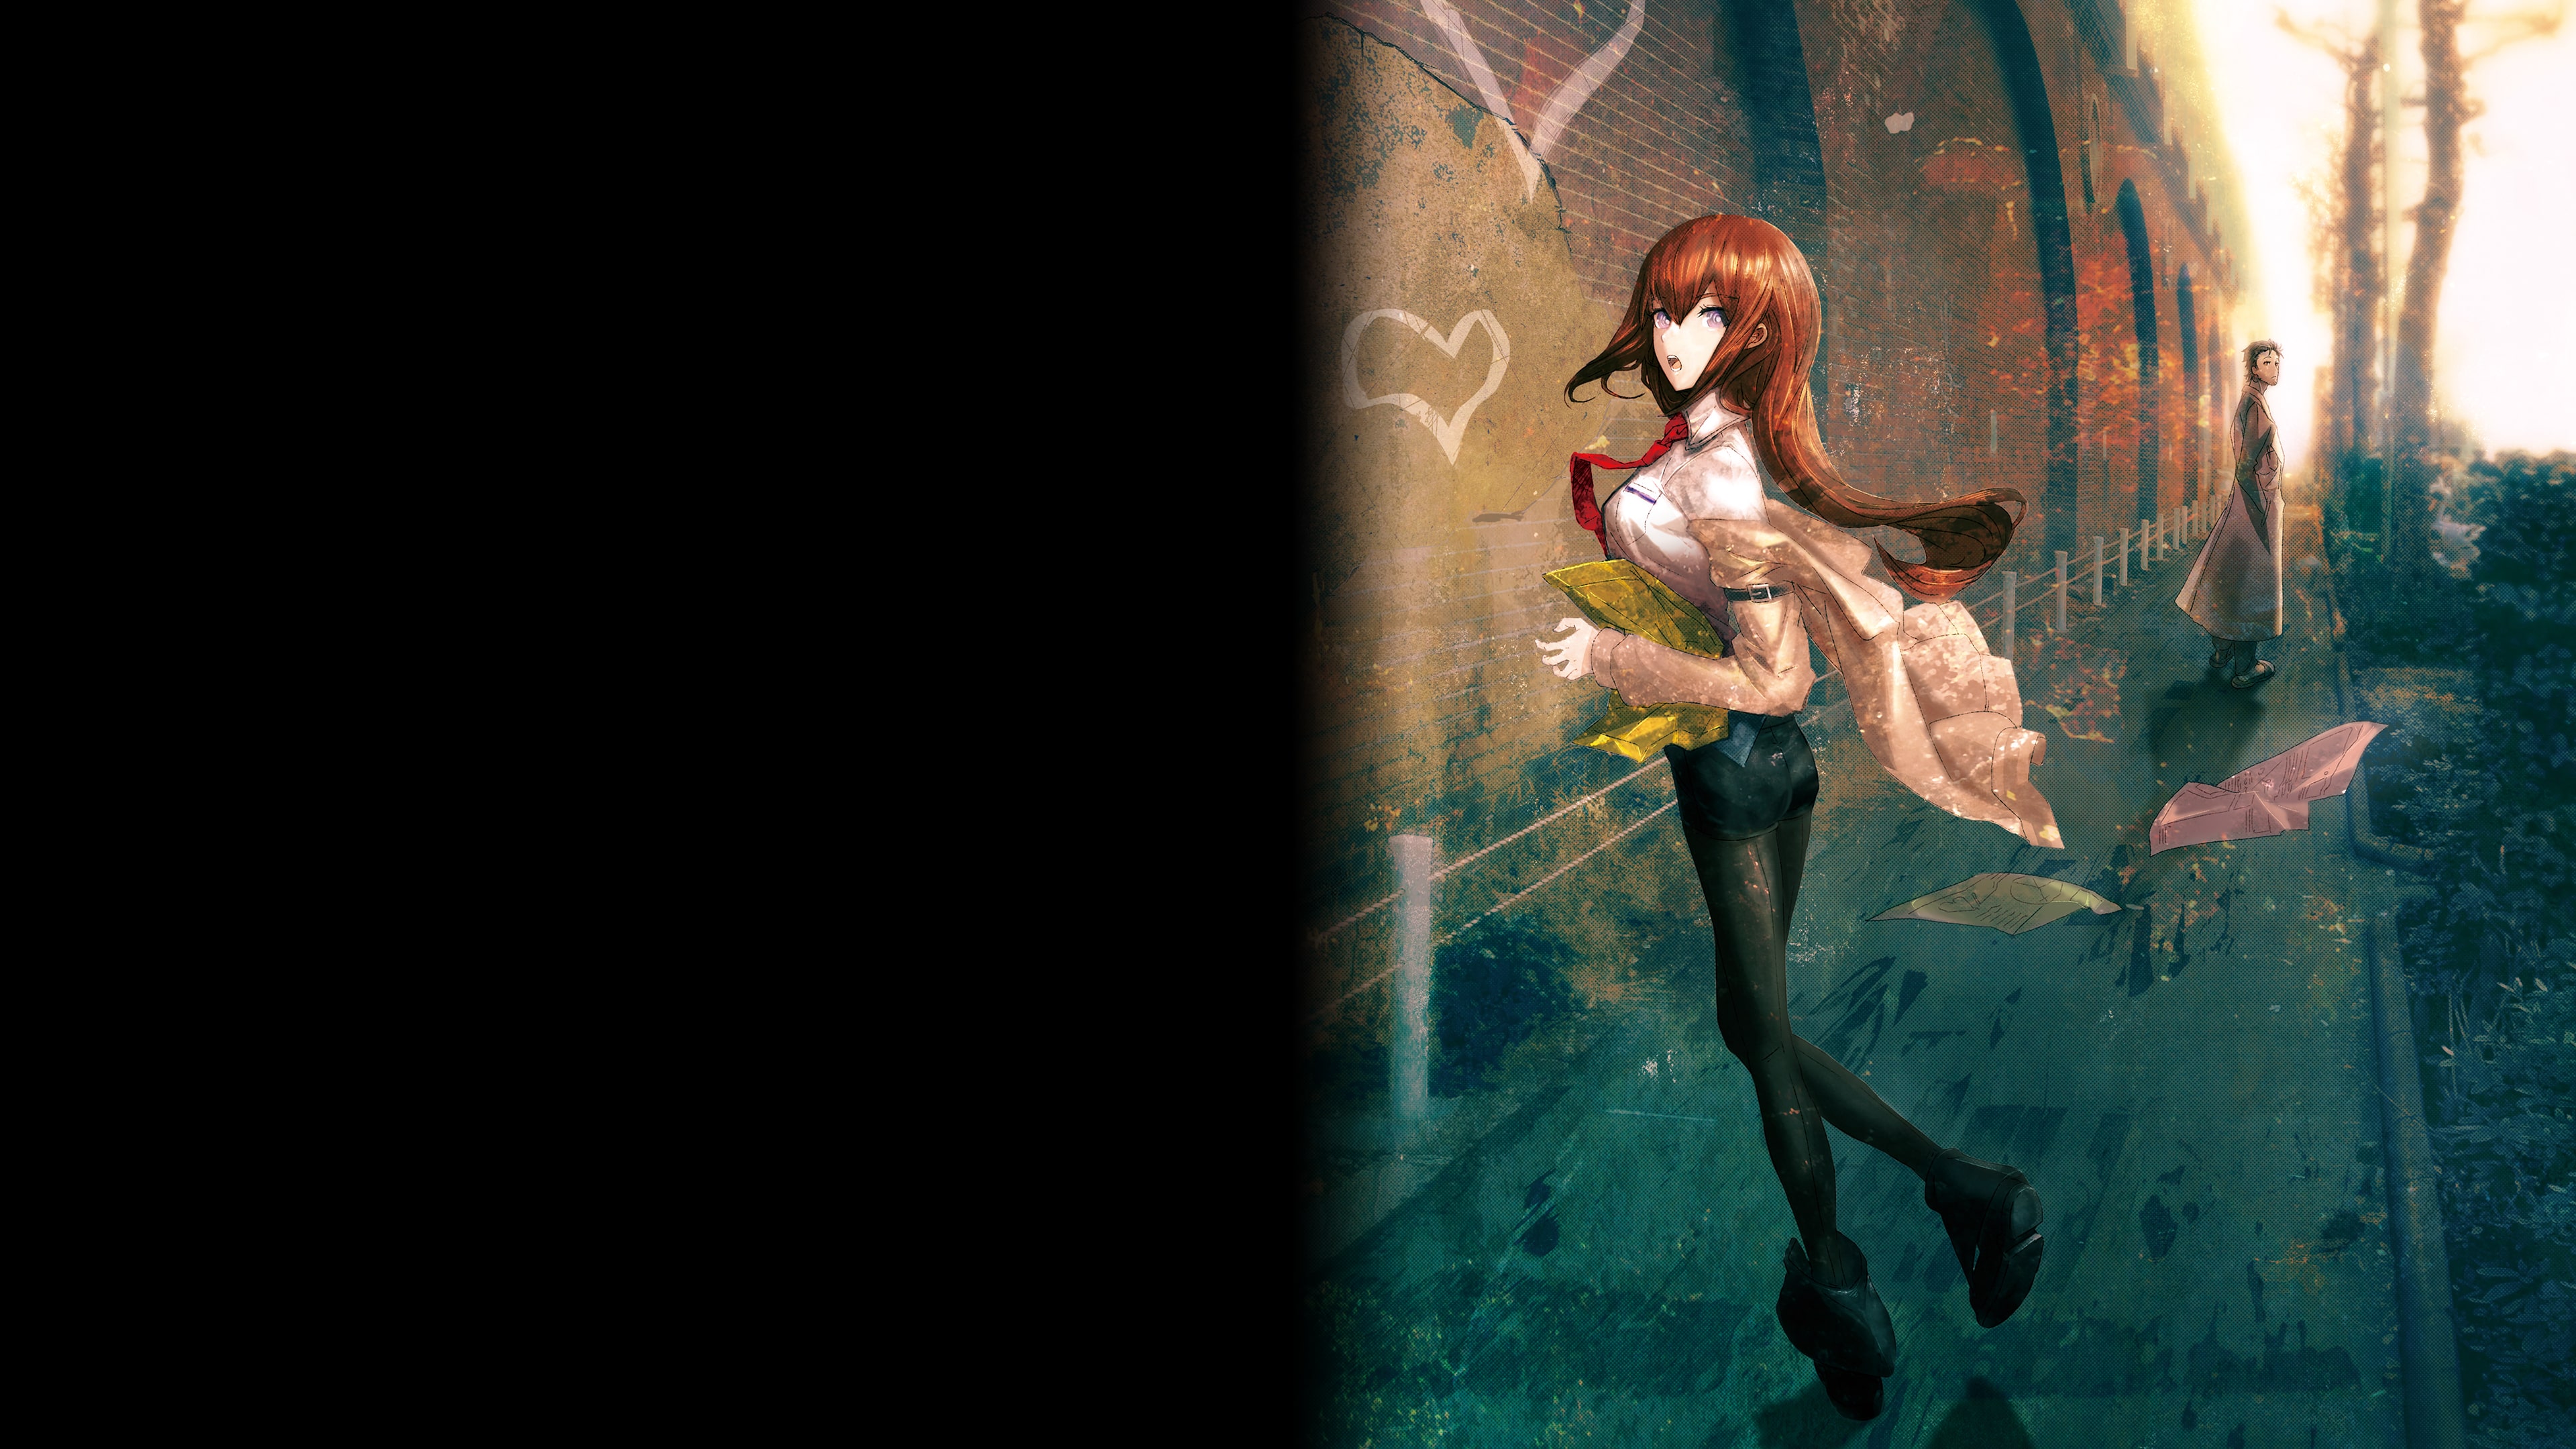 STEINSGATE: My Darling's Embrace